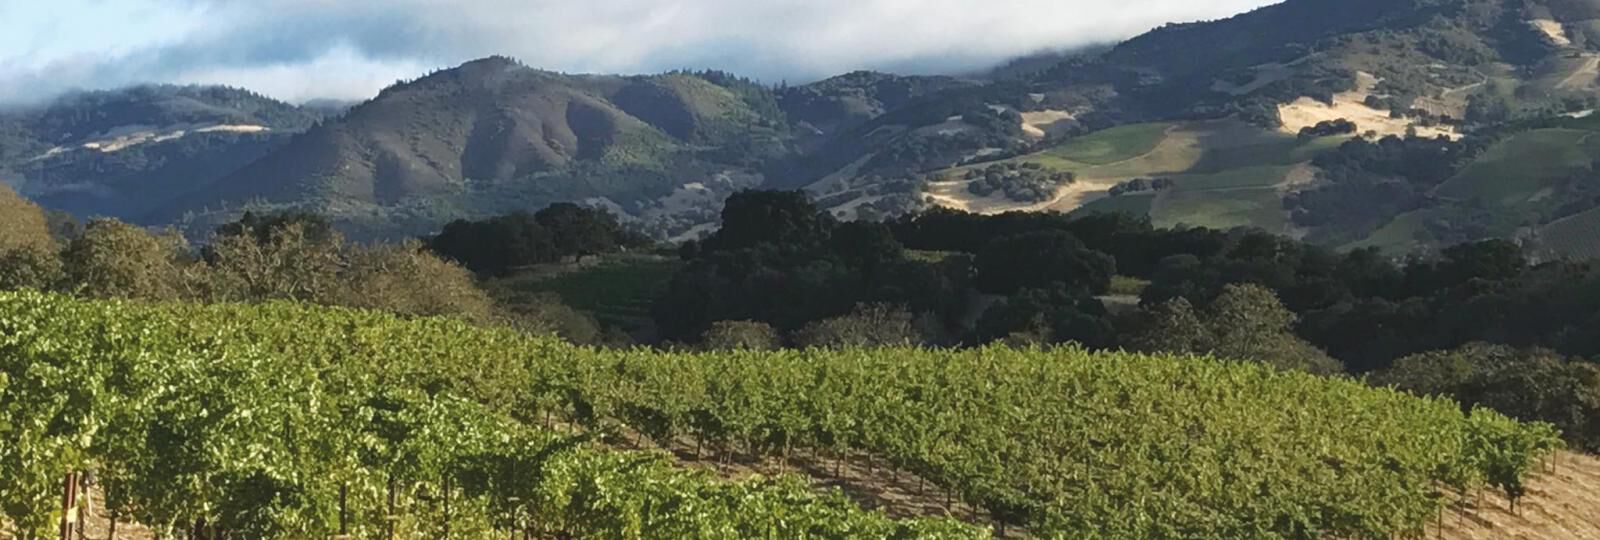 10 INTERESTING FACTS ABOUT SMOTHERS-REMICK RIDGE VINEYARD
